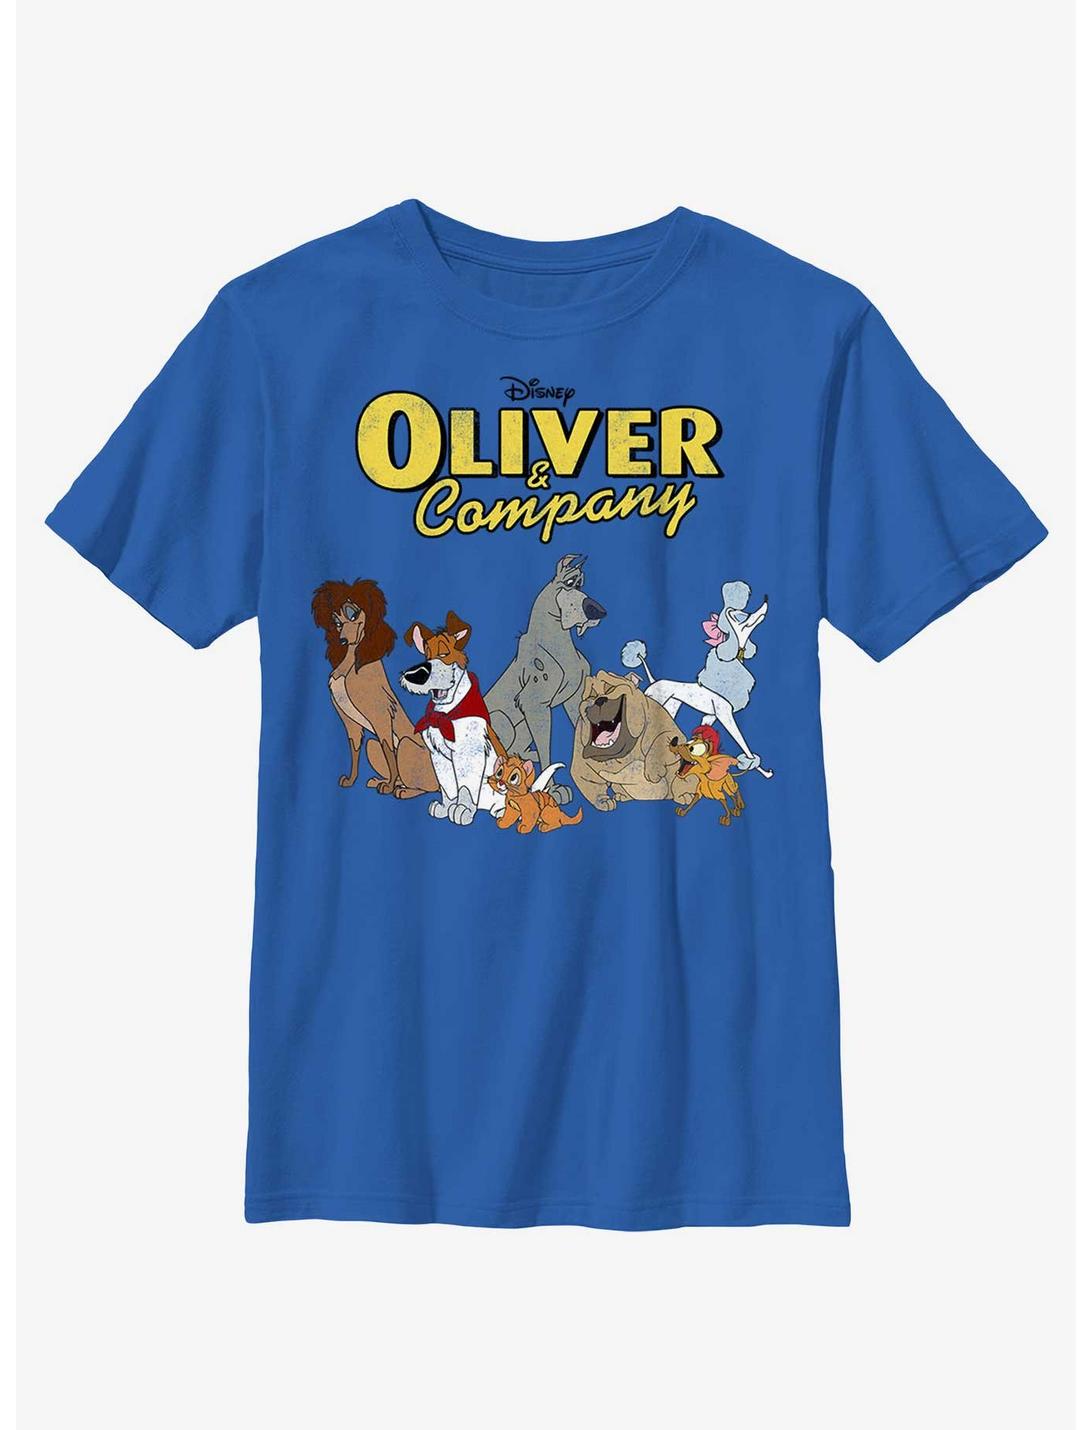 Disney Oliver & Company Who Let The Dogs Out Youth T-Shirt, ROYAL, hi-res